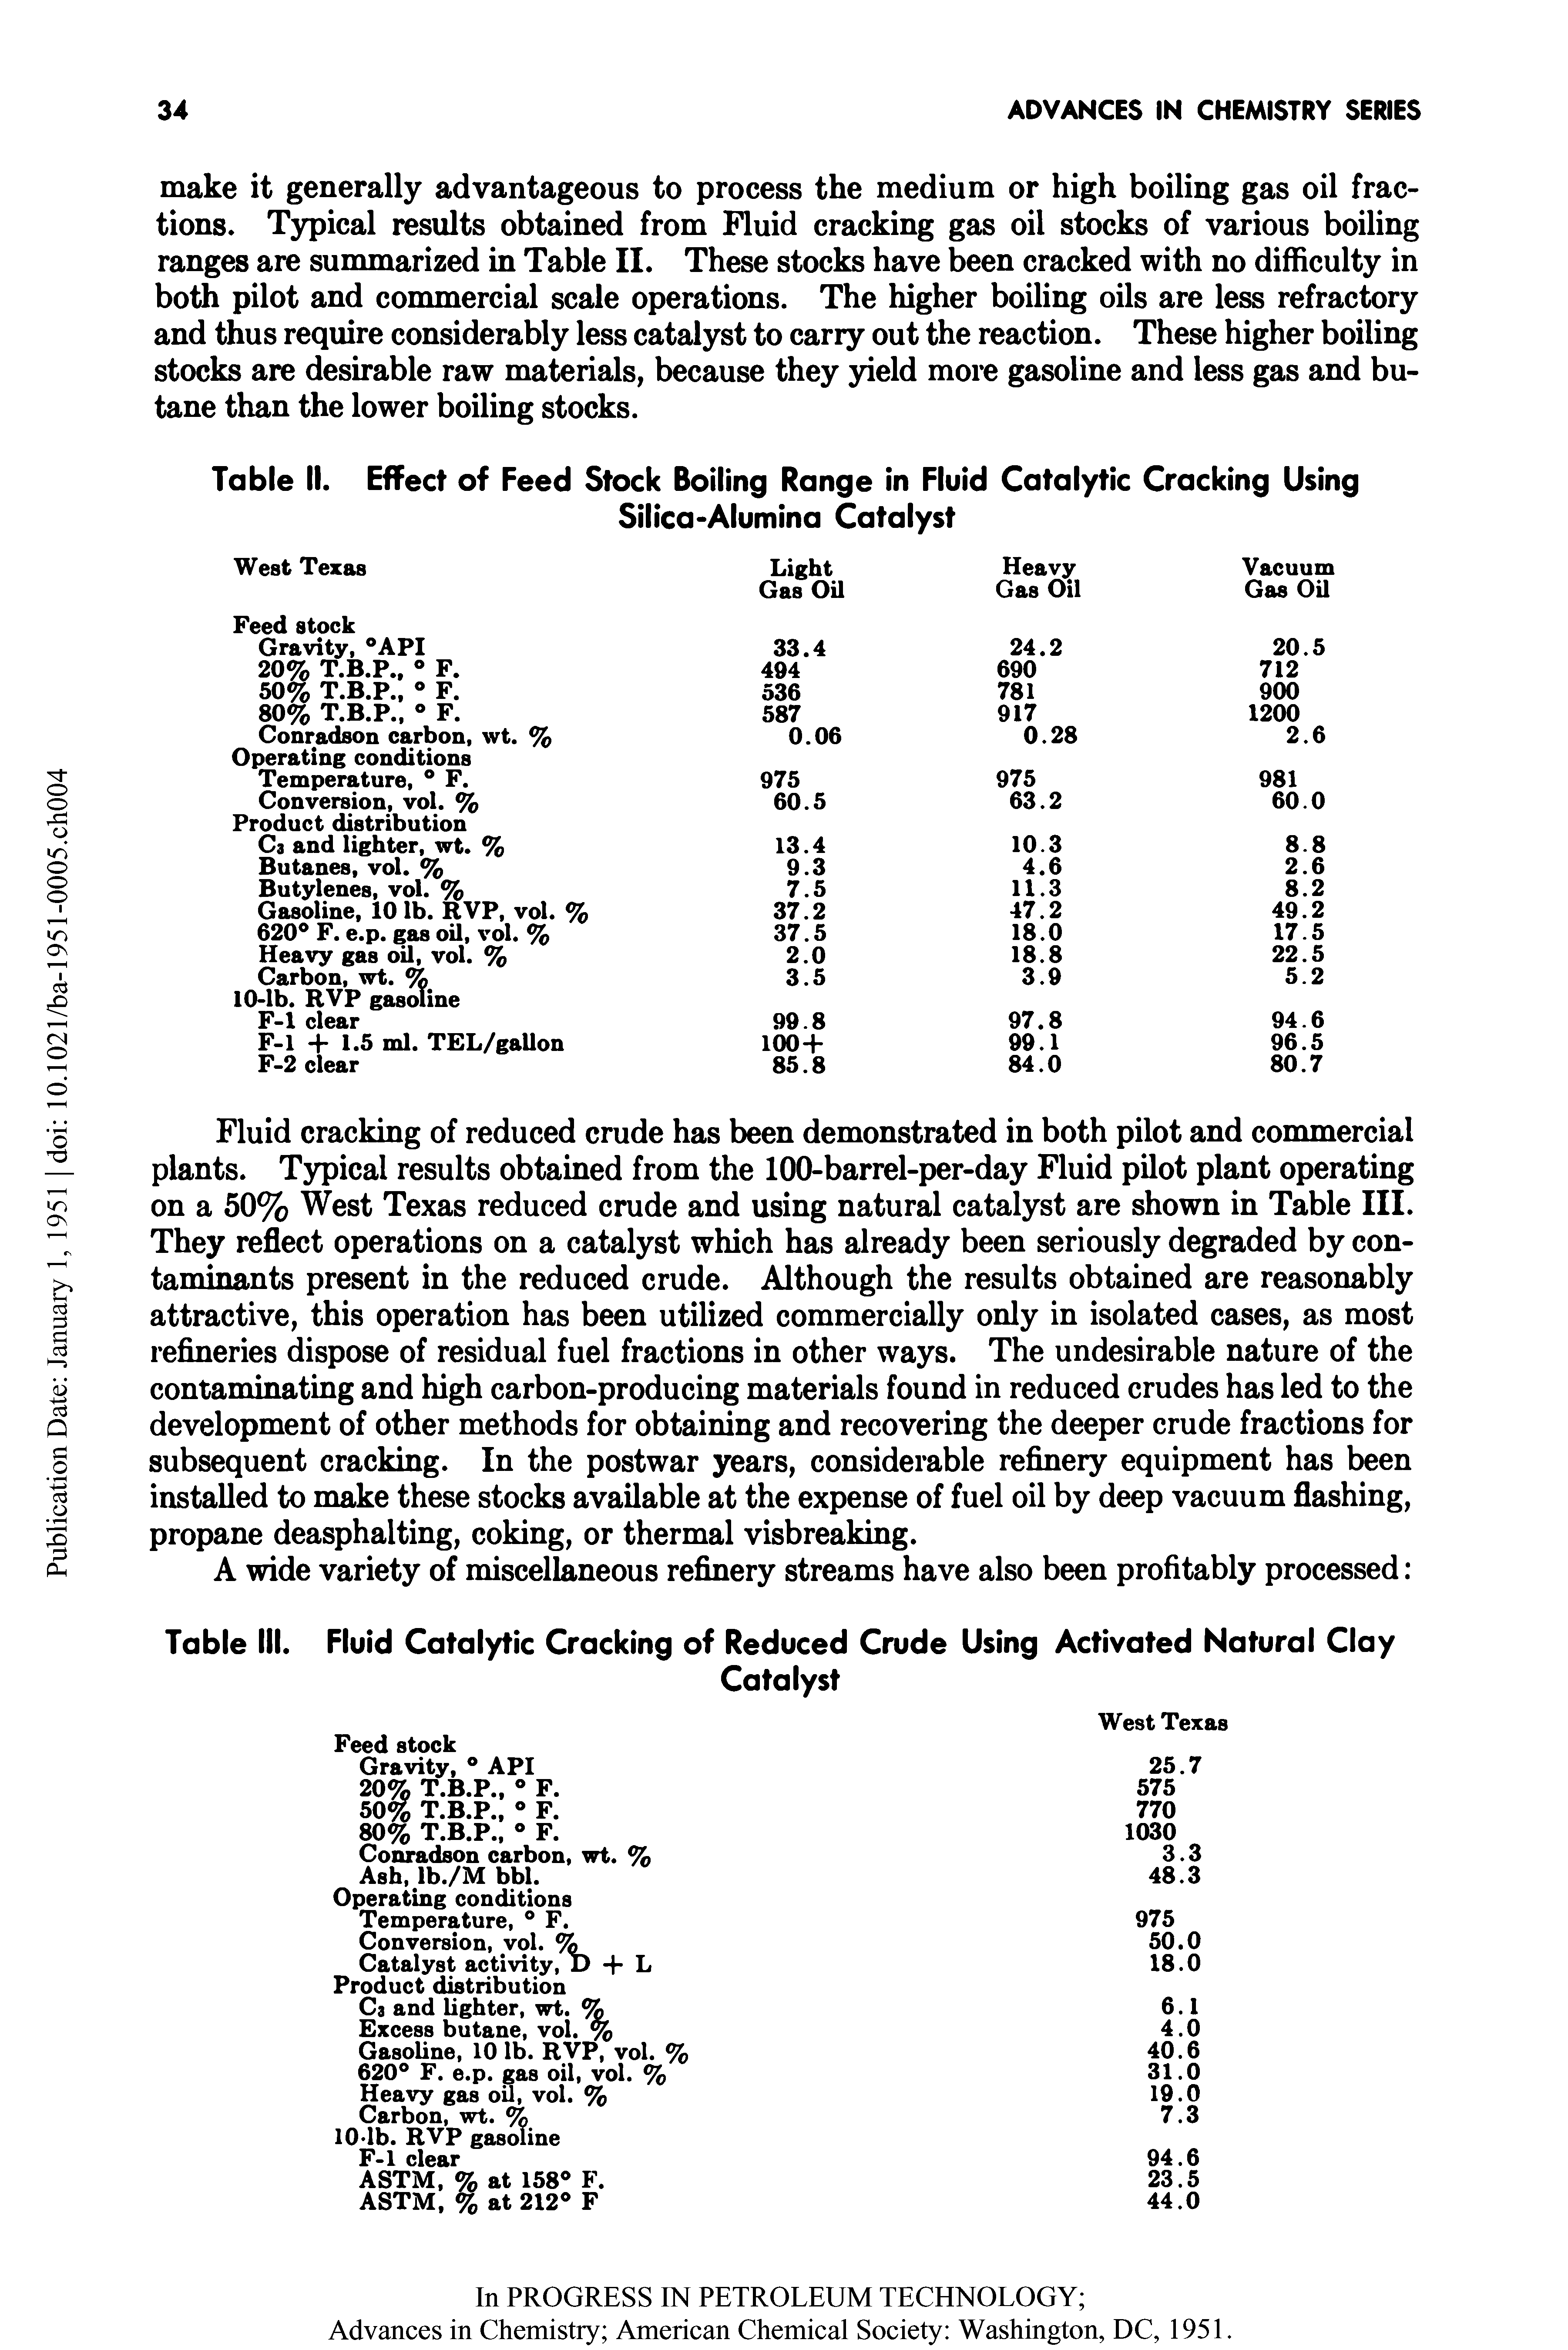 Table III. Fluid Catalytic Cracking of Reduced Crude Using Activated Natural Clay...